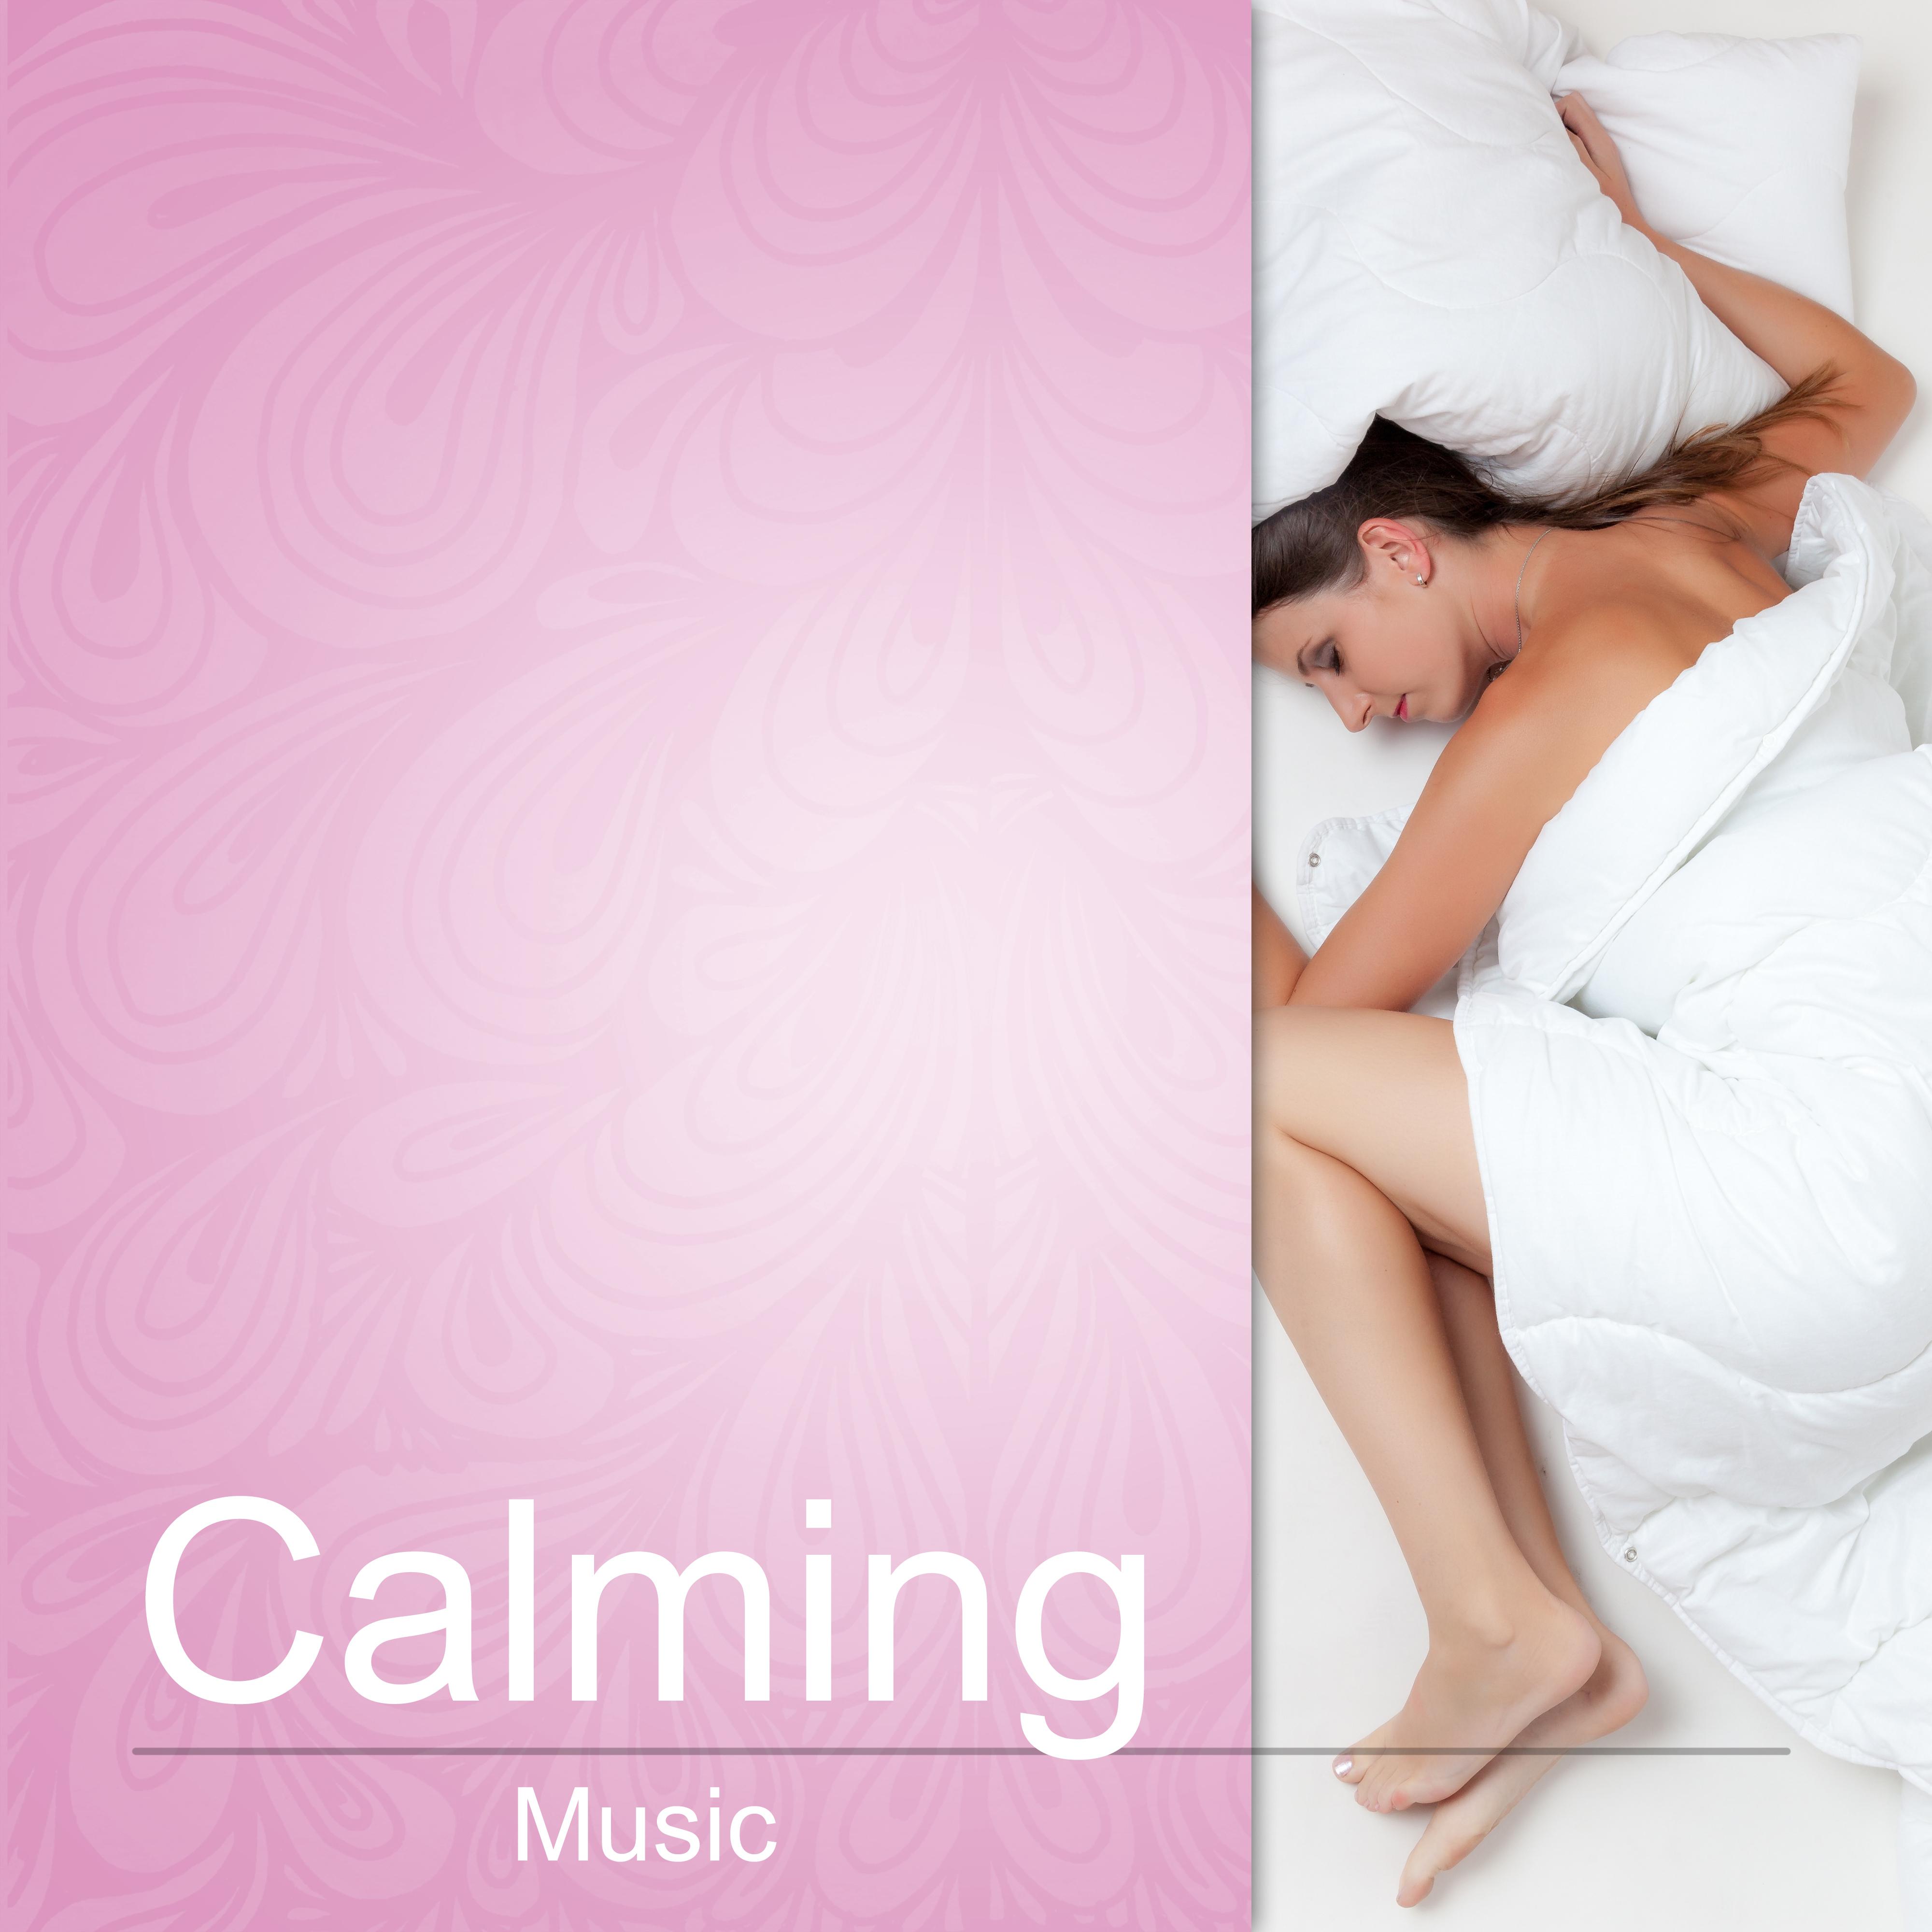 Calming Music - Music to Help You Fall Asleep Easily, Natural Music for Healing Through Sound and Touch